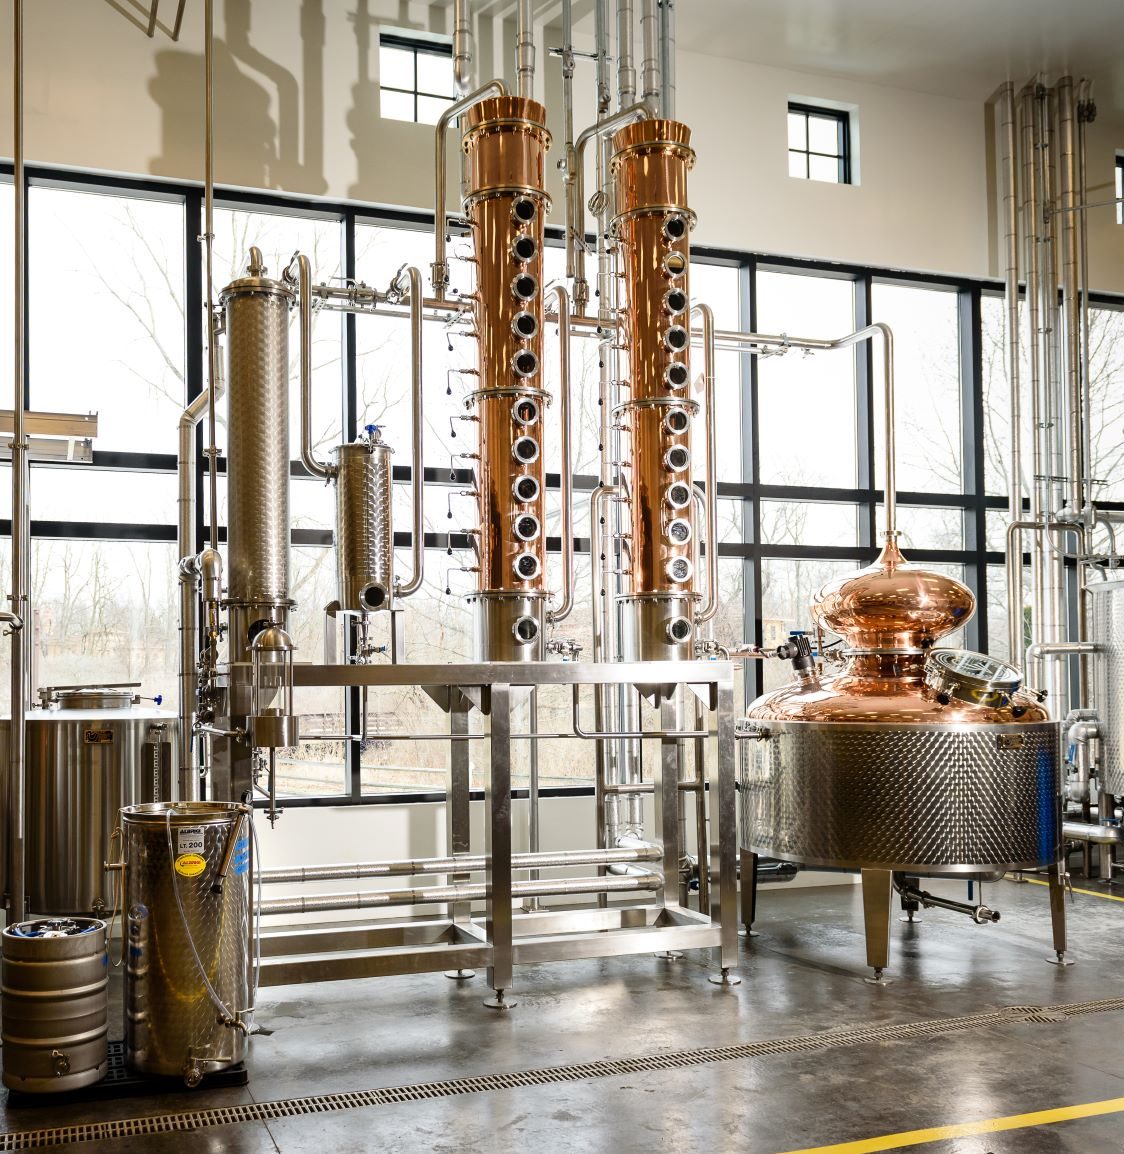 A copper distillation system with two columns.